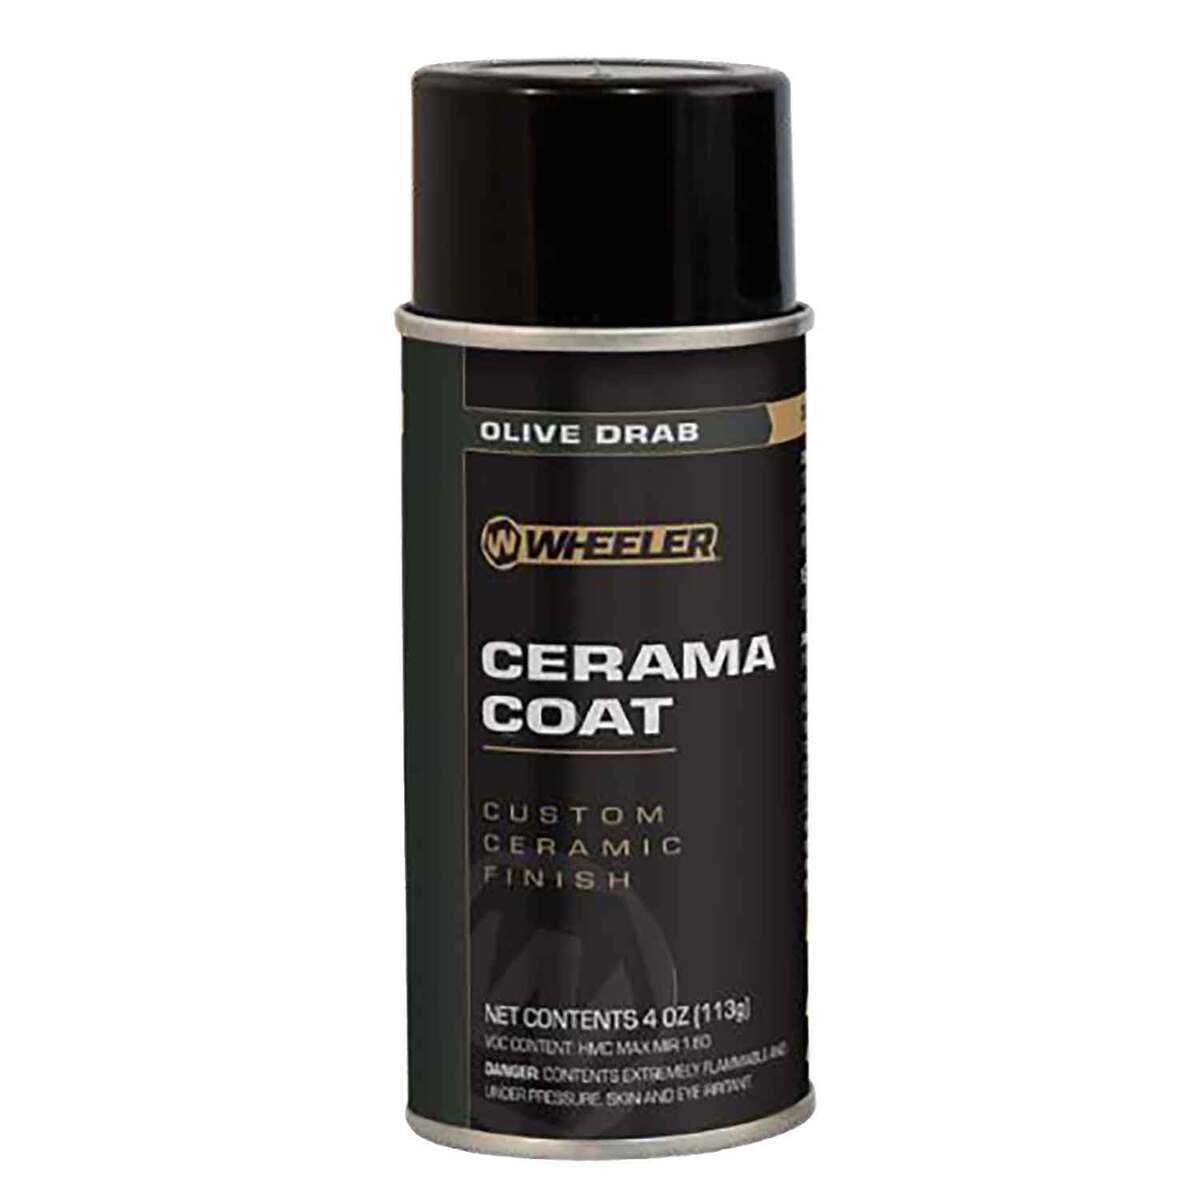  Wheeler Cerama-Coat, Spray On Ceramic Coating for Customizable,  Scratch Resistant, Non-Reflective Matte Coating, Black, 1 Count (Pack of 1)  : Tools & Home Improvement